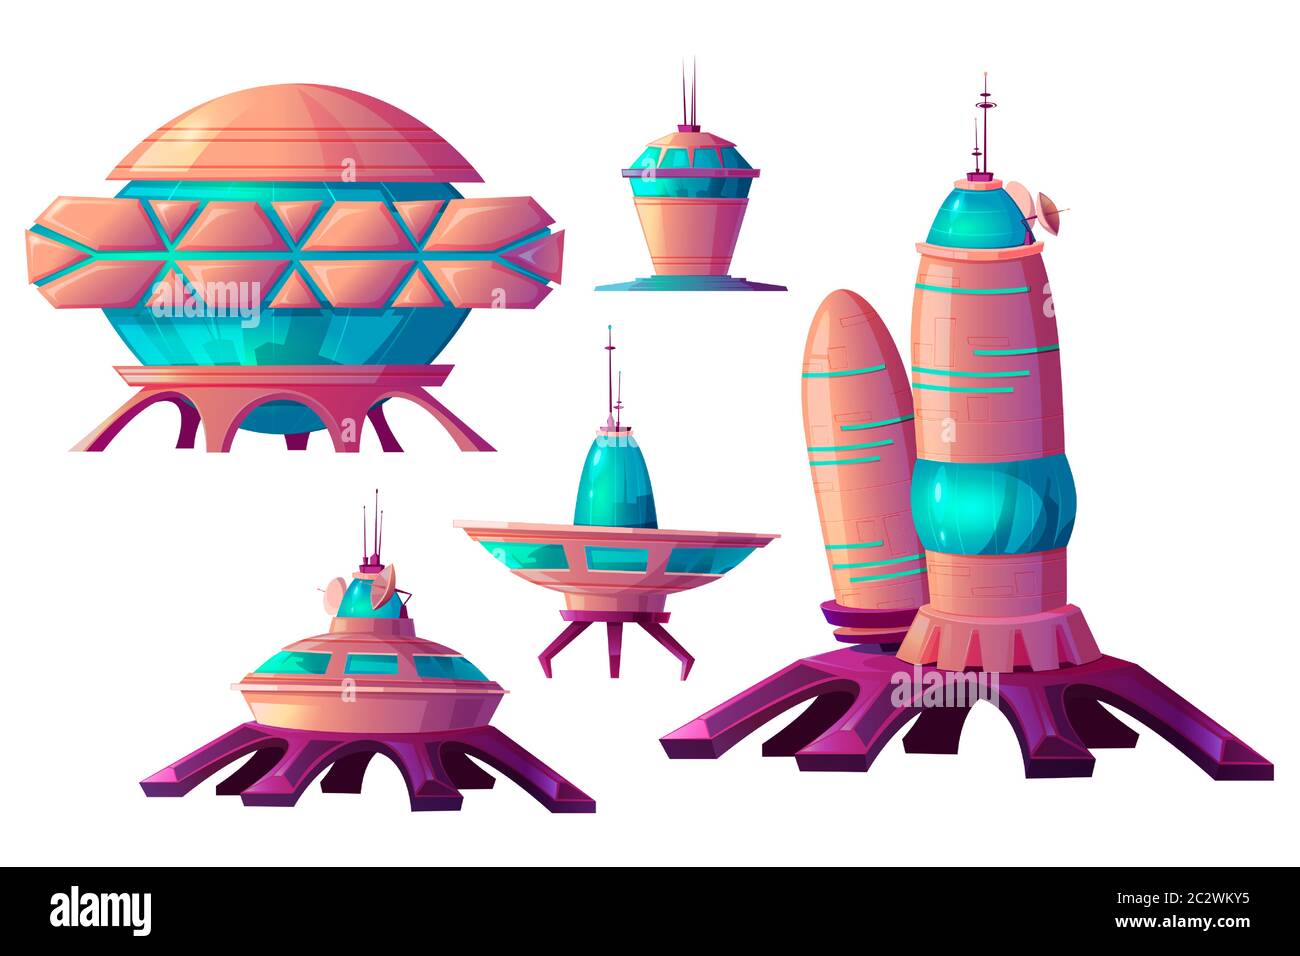 Space colonization cartoon vector set illustrations. Spaceships and rocket or shuttle for universe exploration, cosmic base and elements of alien sett Stock Vector